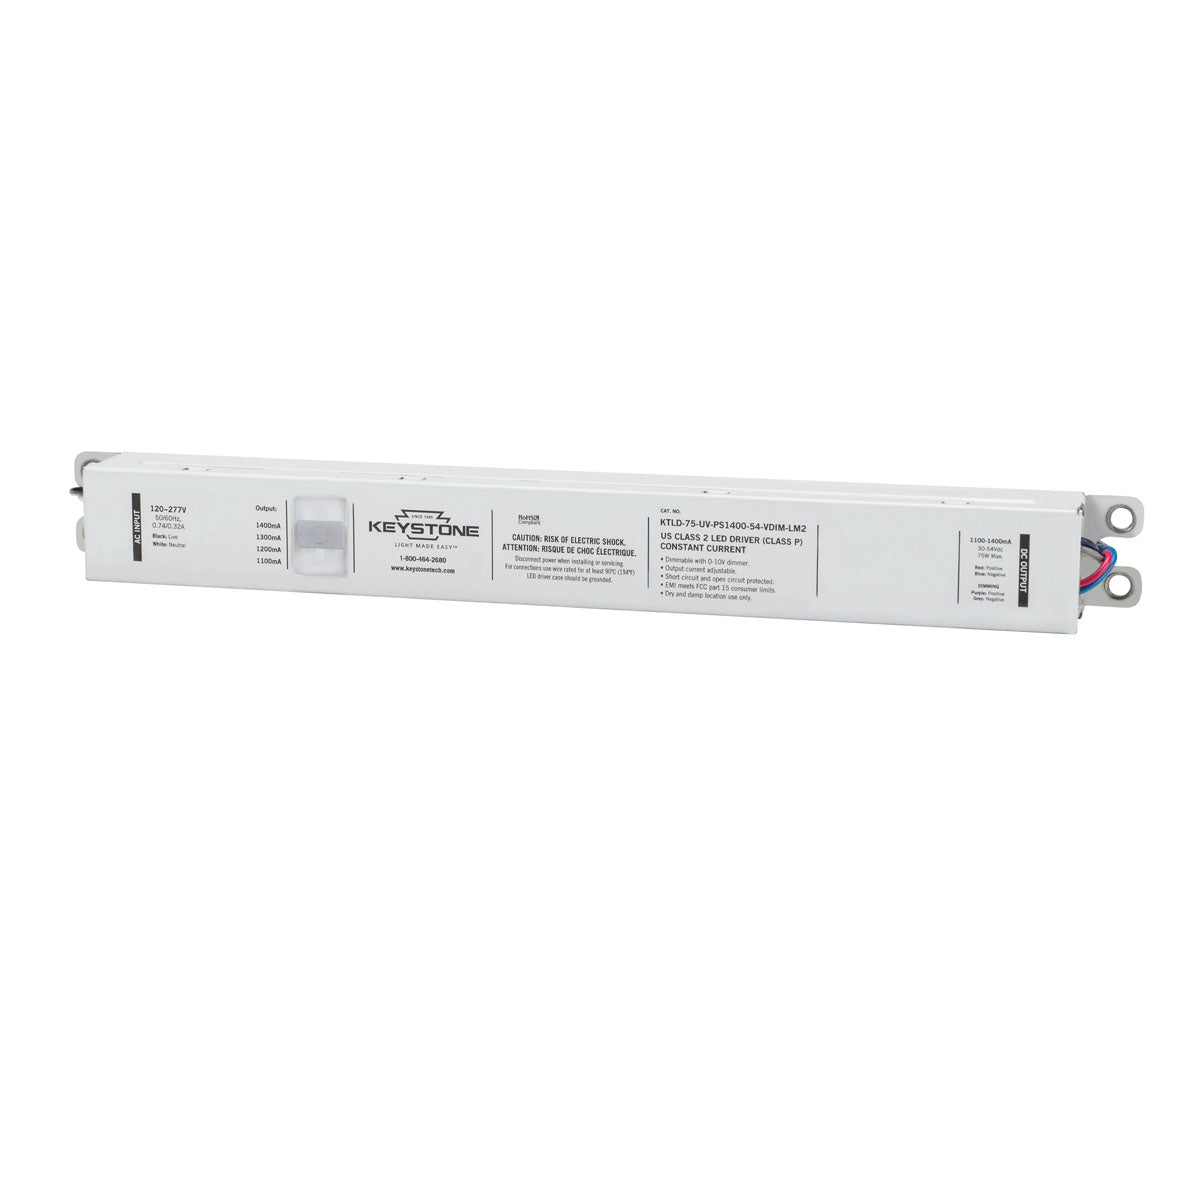 Power Select LED Driver, 75W, Adjustable Constant Current 1400-1700mA, 0-10V Dimming, 120-277V Input - Bees Lighting